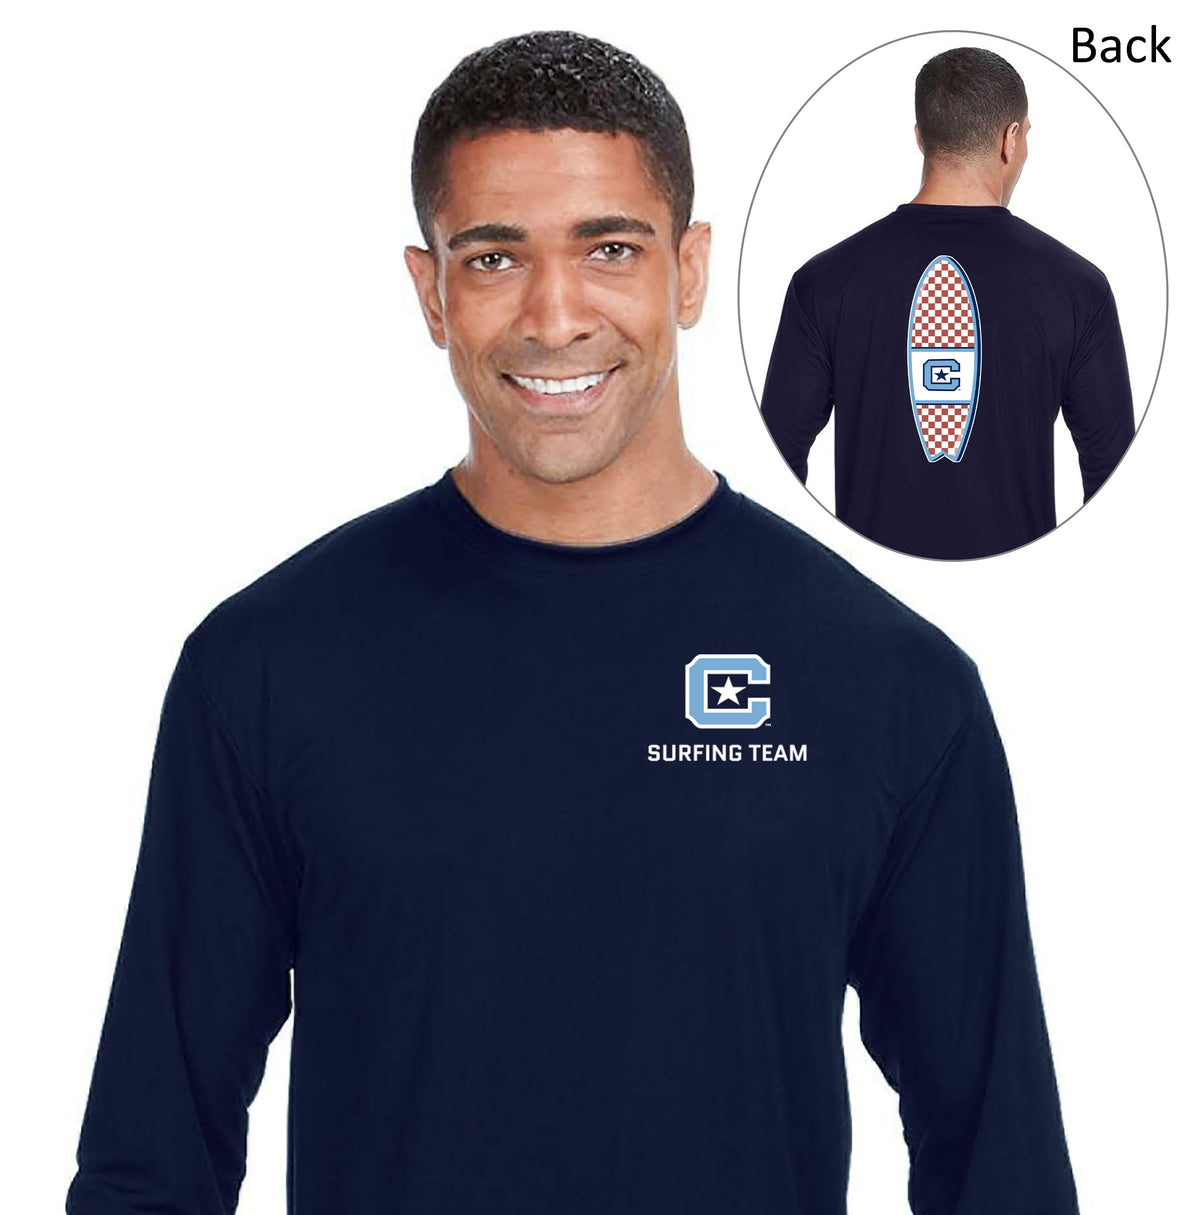 The Citadel, Club Sports - Surfing Team, A4 Cooling Performance Long Sleeve Tee Shirt- Navy